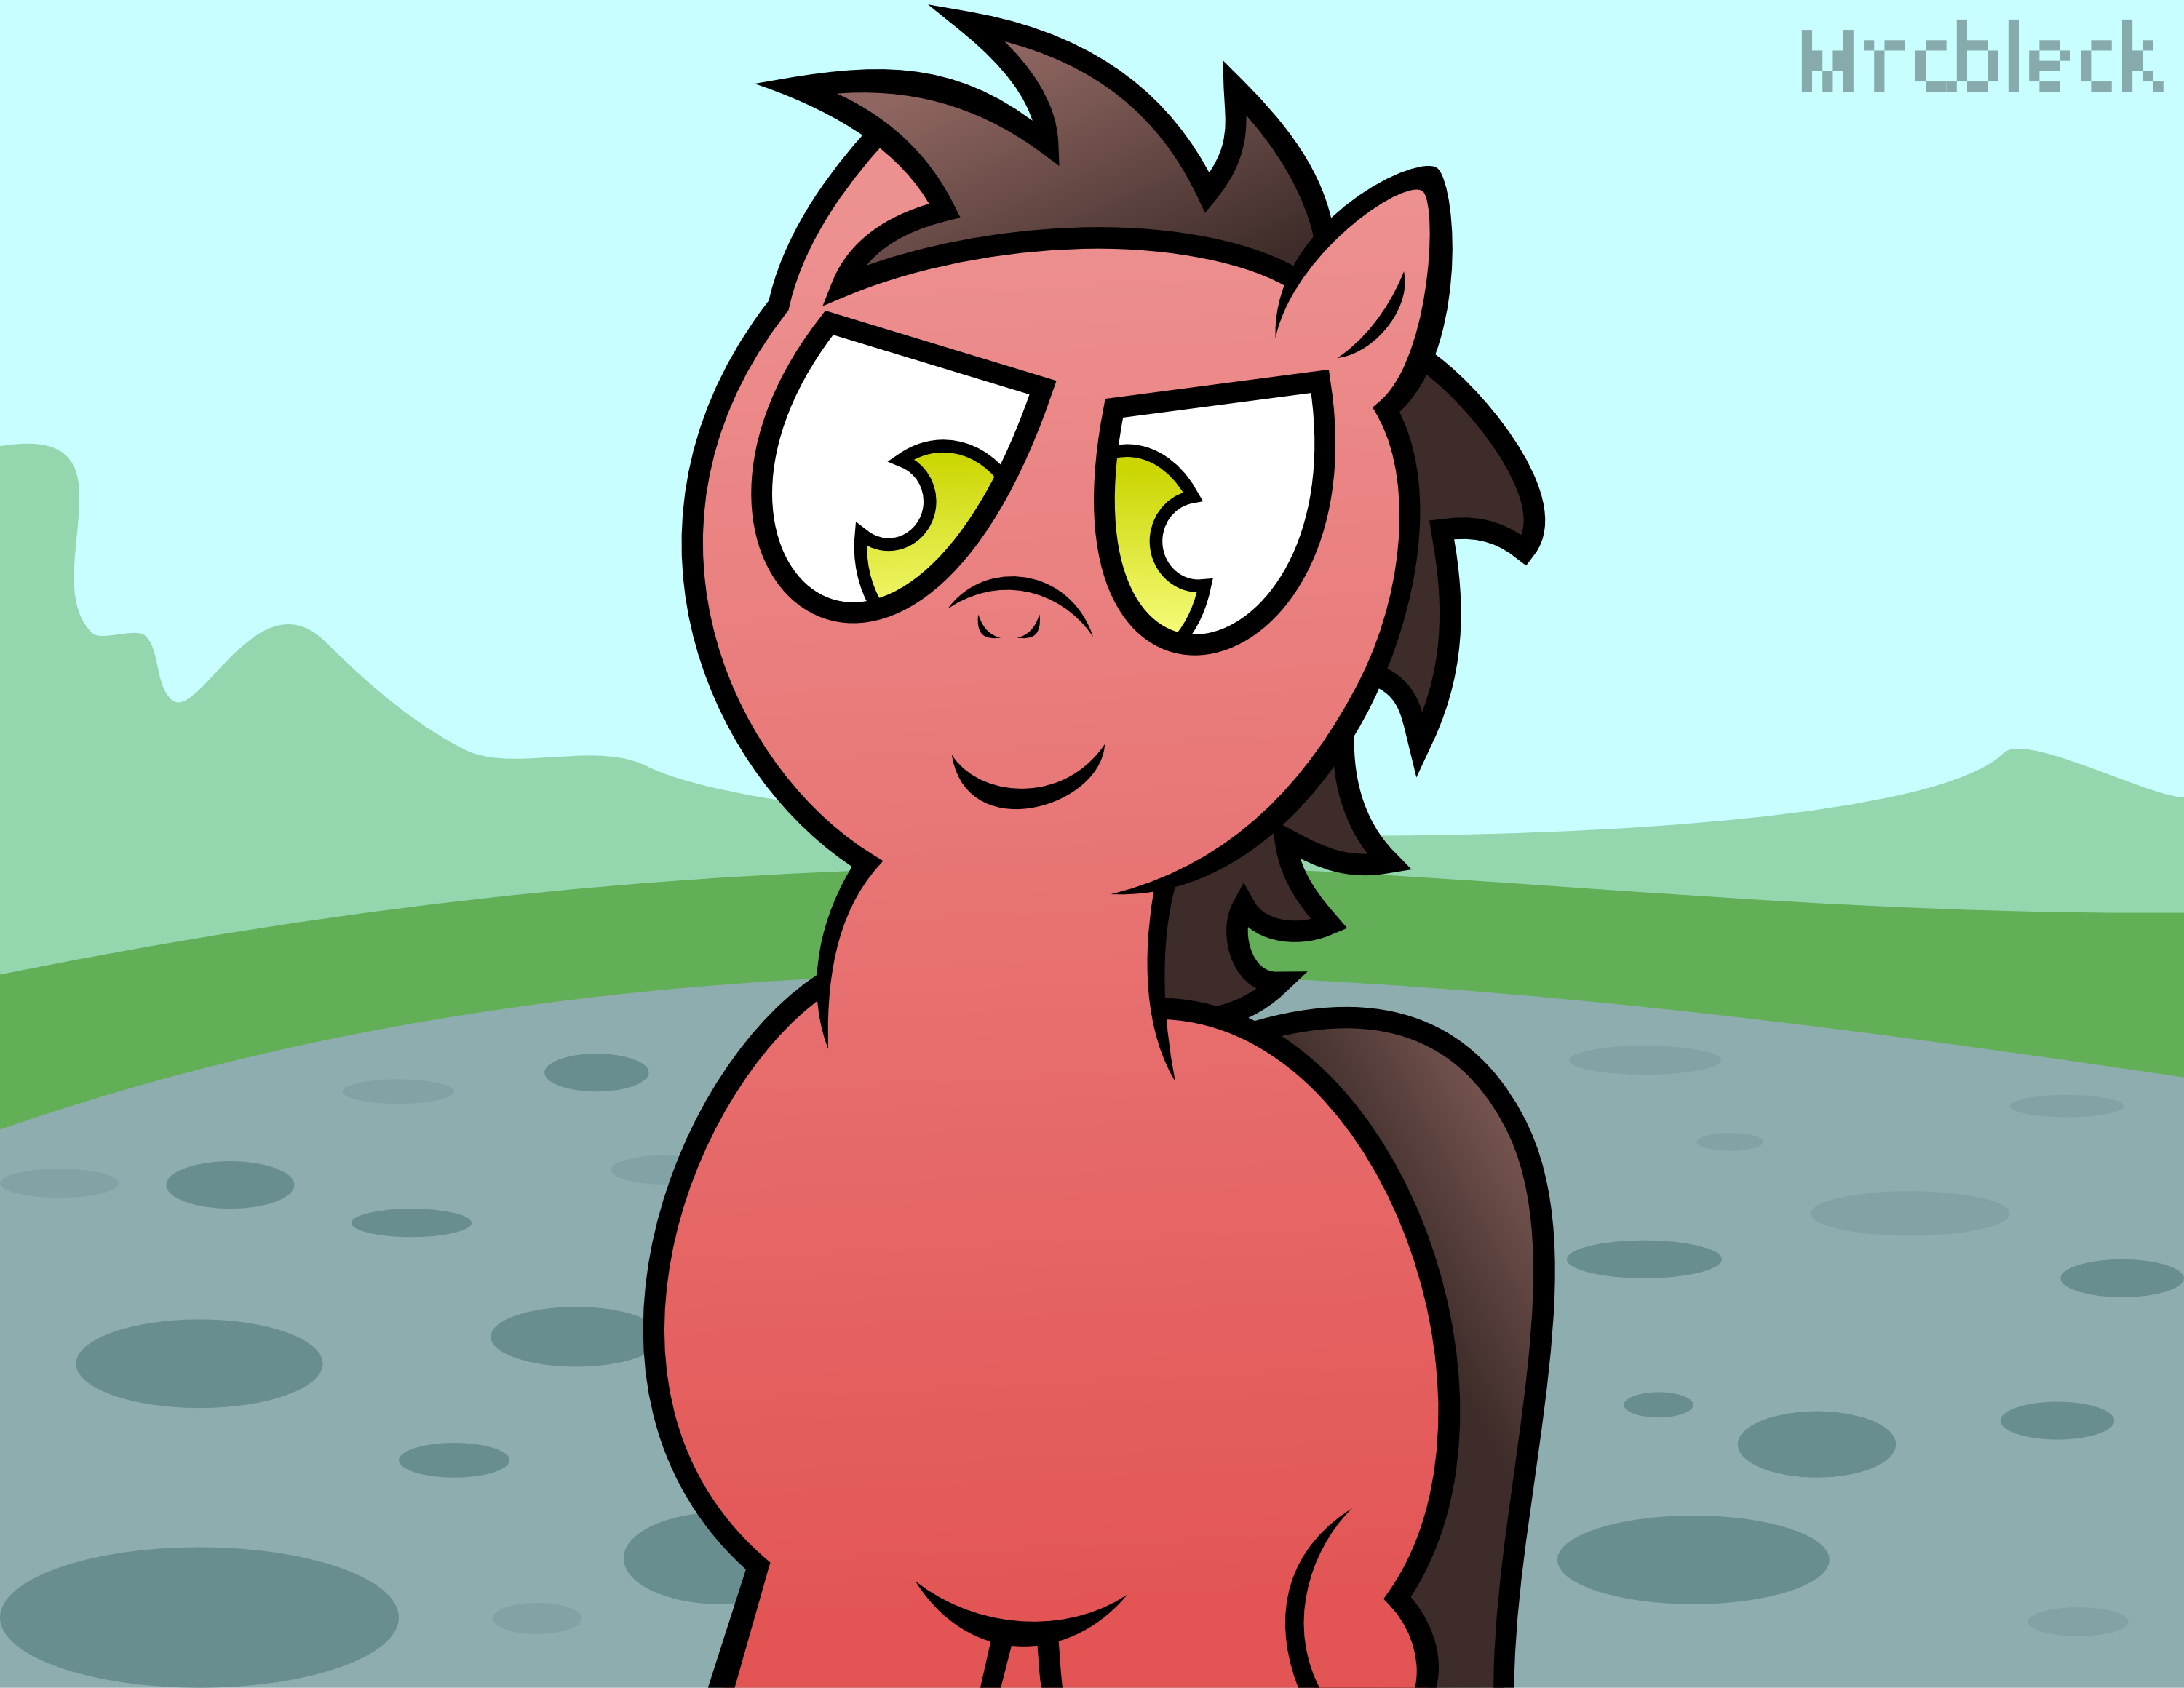 430580 Artistmrcbleck Banned From Equestria Daily Edit Hd Oc